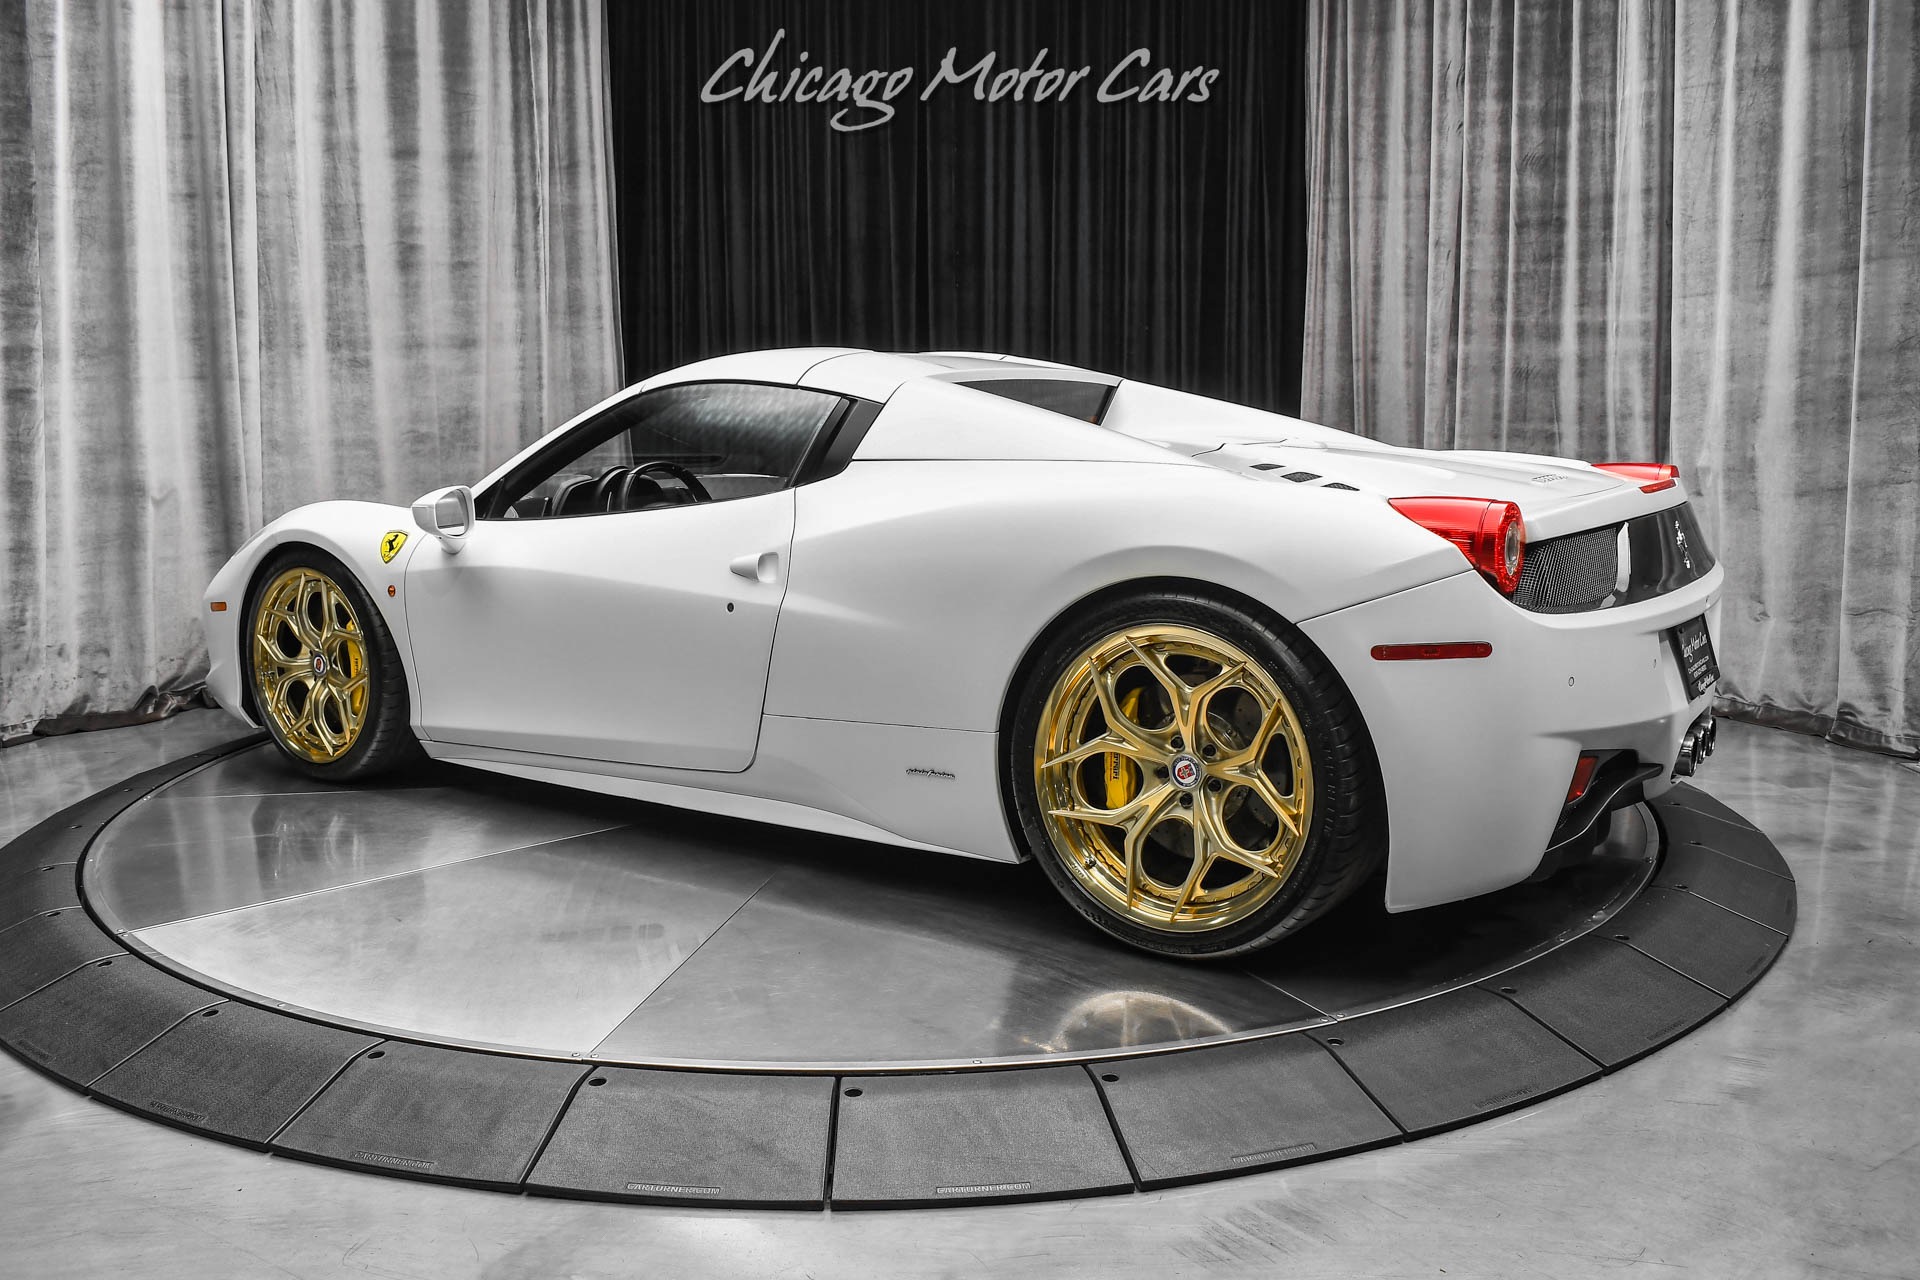 Used-2013-Ferrari-458-Spider-RARE-Racing-Seats-TONS-of-Carbon-Fiber-HRE-Wheels-FULL-PPF-LOADED